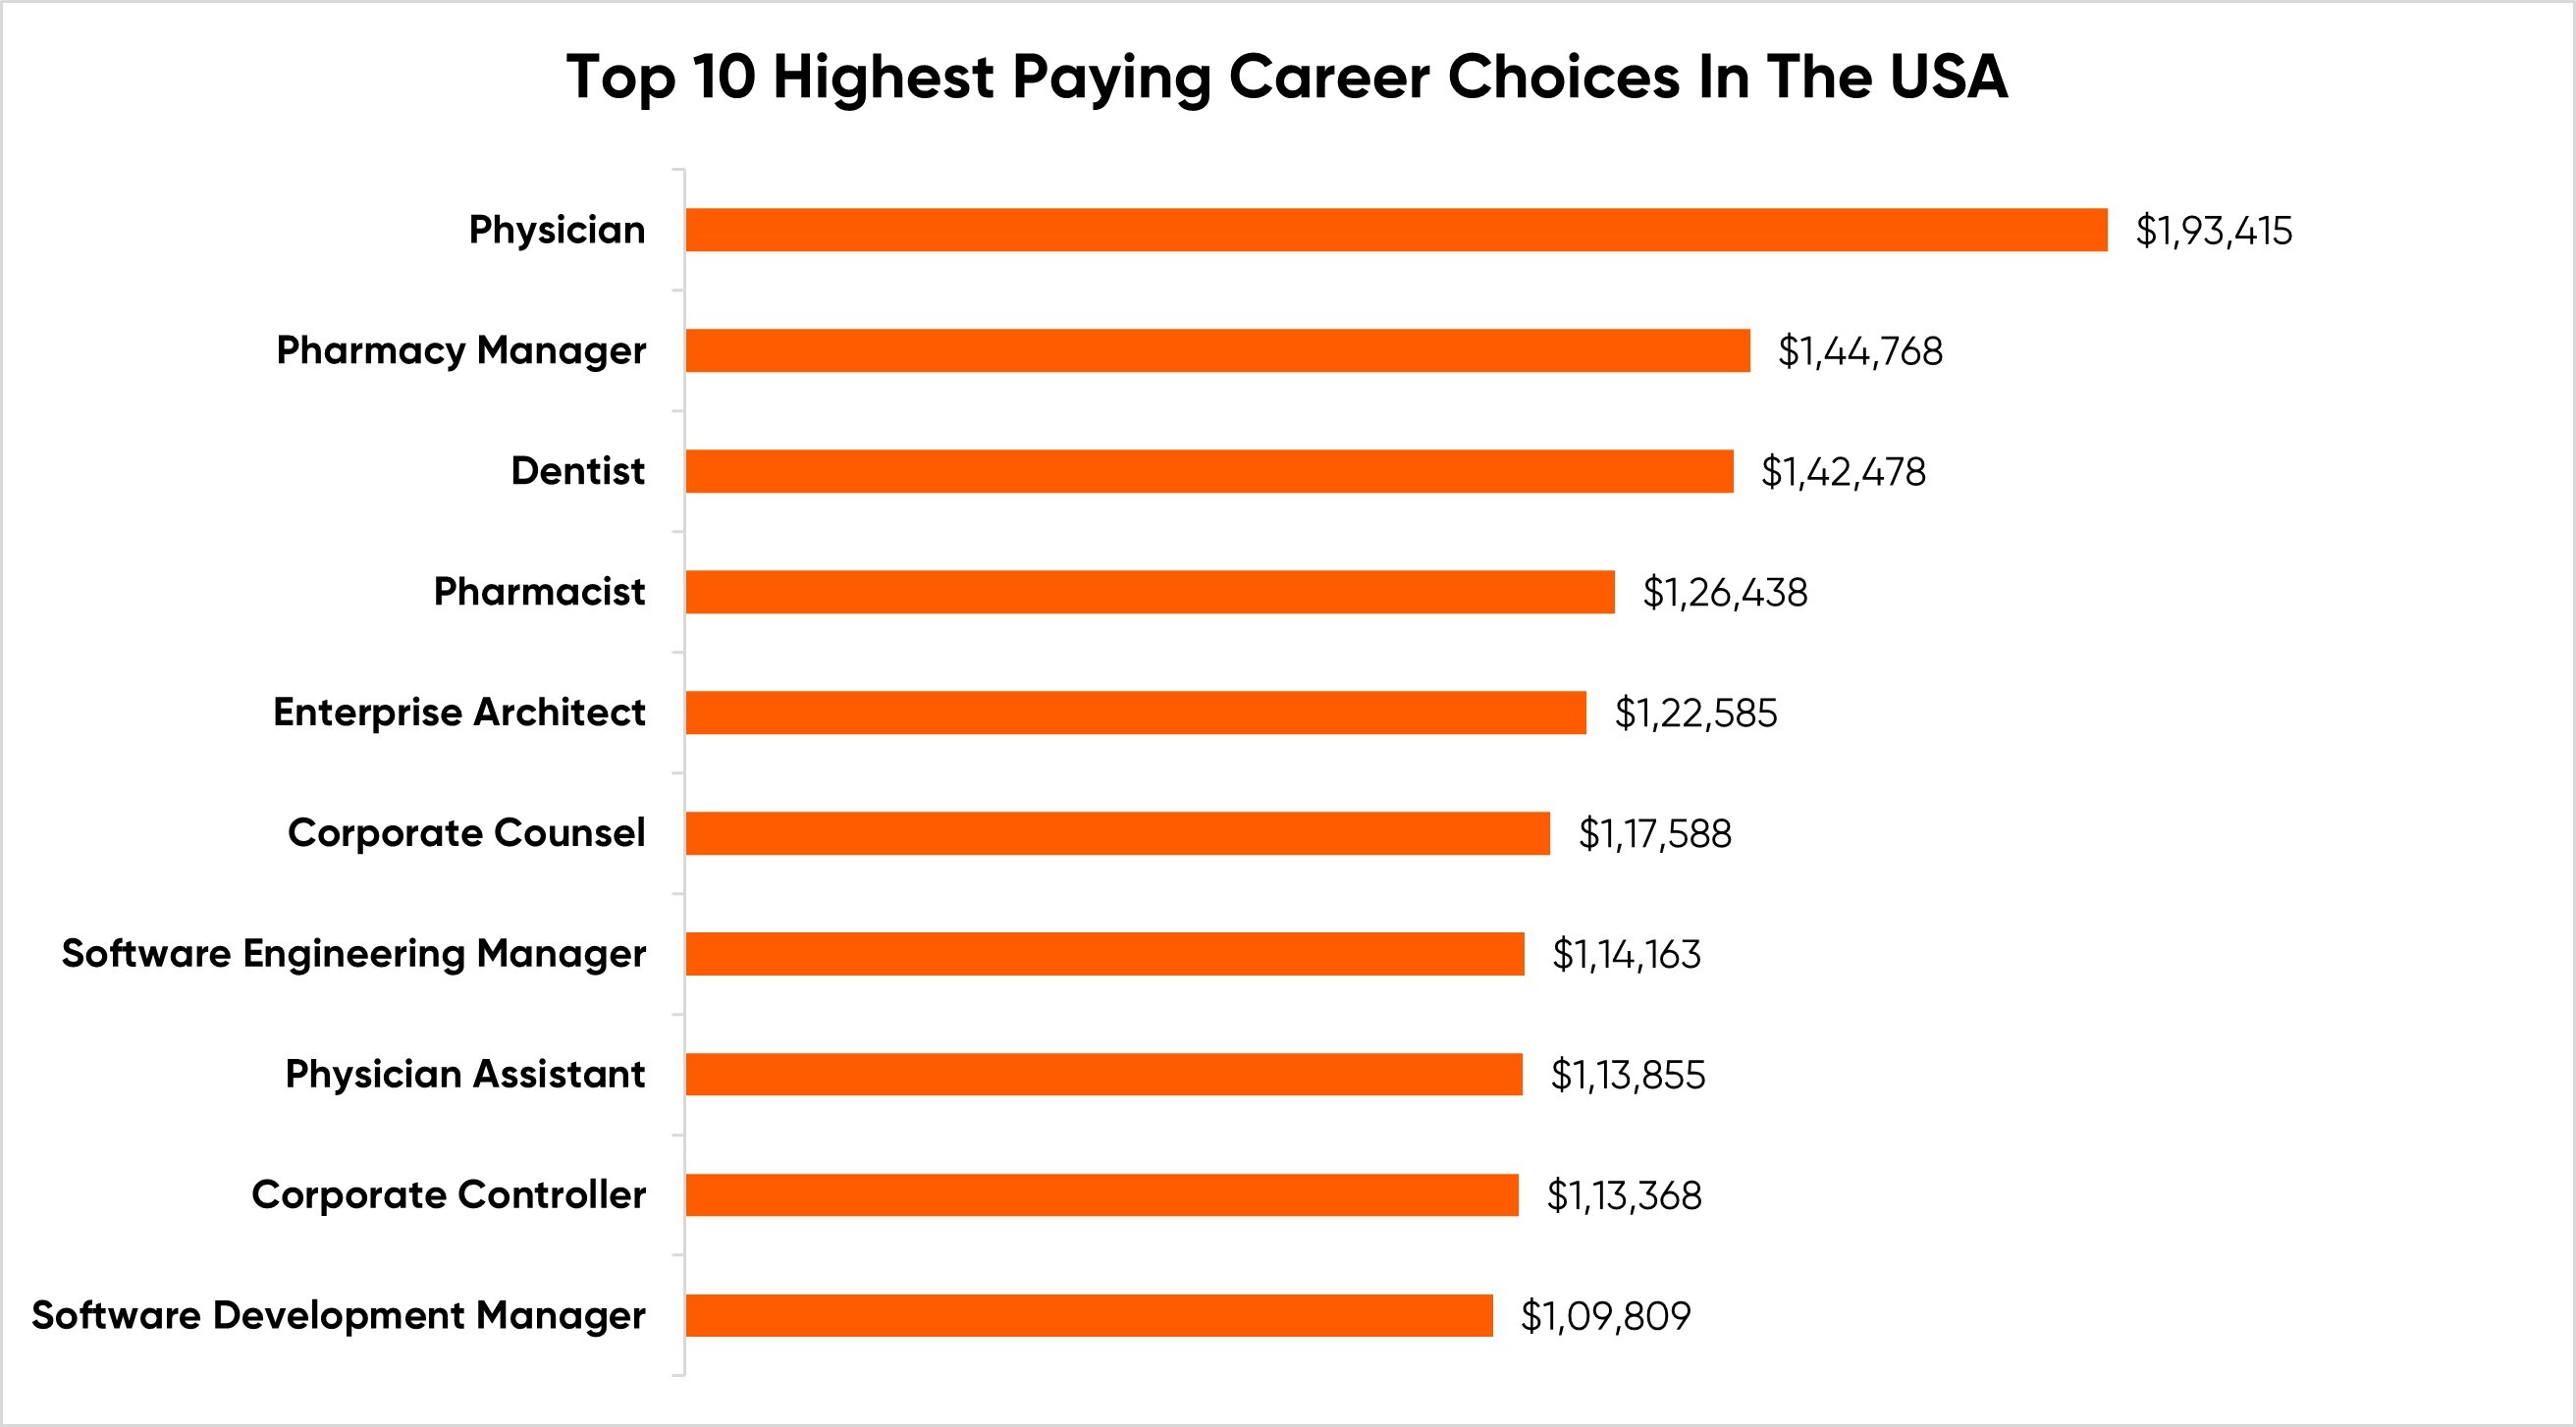 Top 10 highest paying career choices in the USA